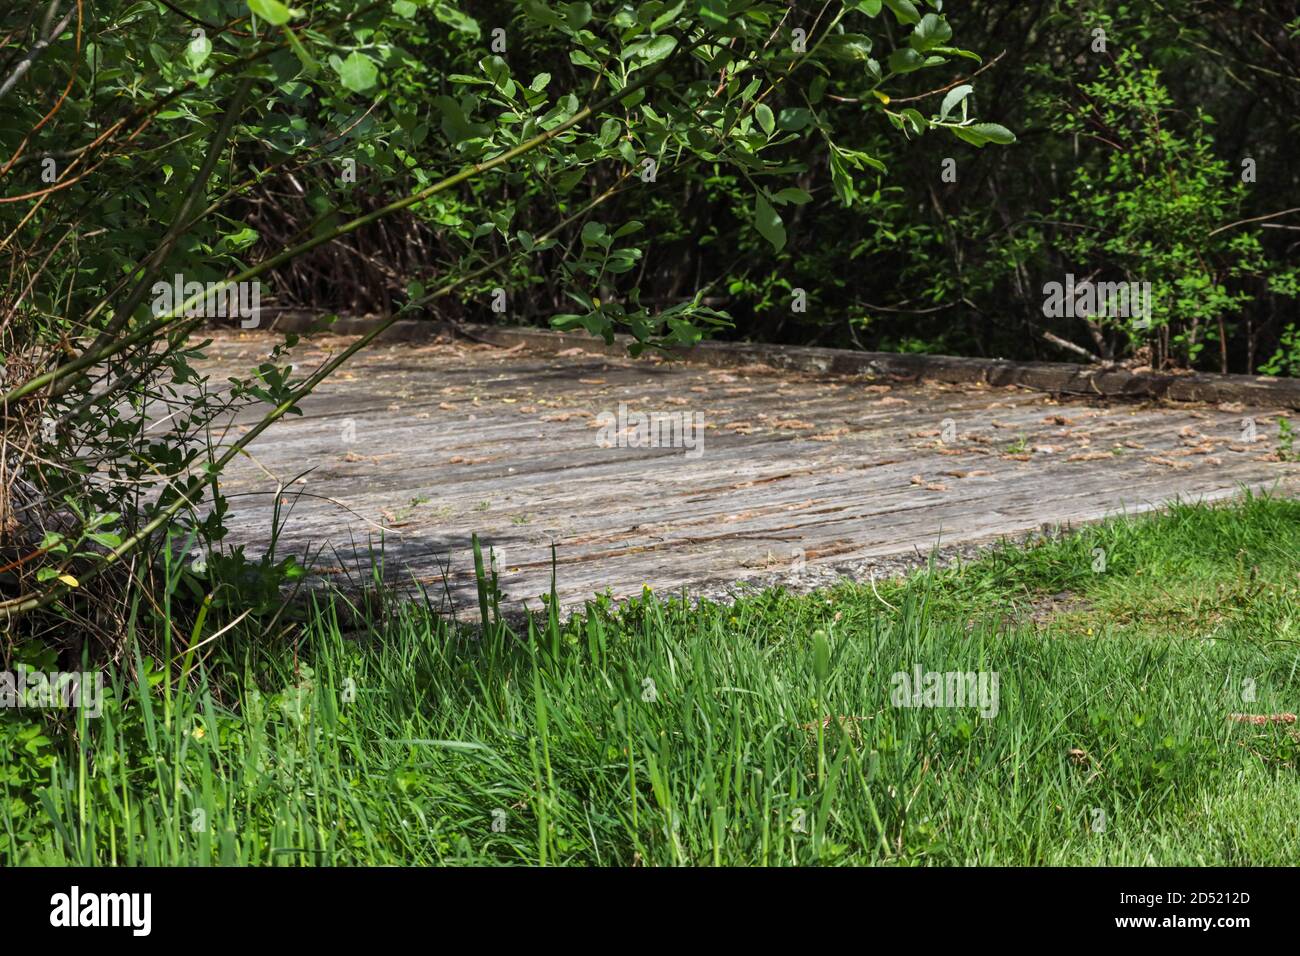 grass and weeds in front of small wooden bridge Stock Photo